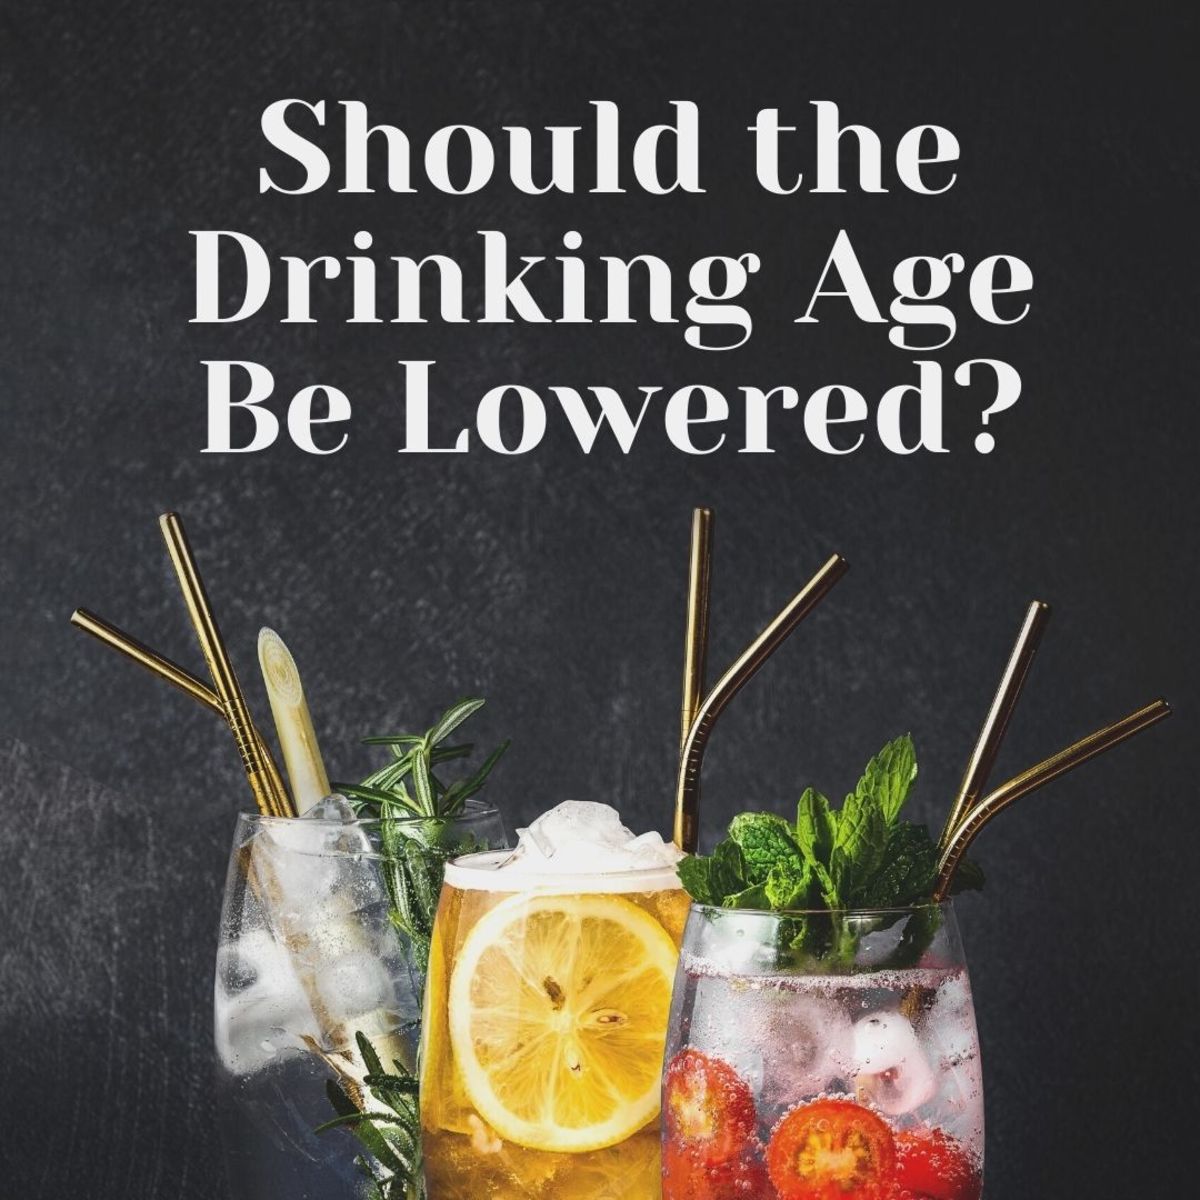 Should Americans be allowed to drink at age 18 instead of 21?